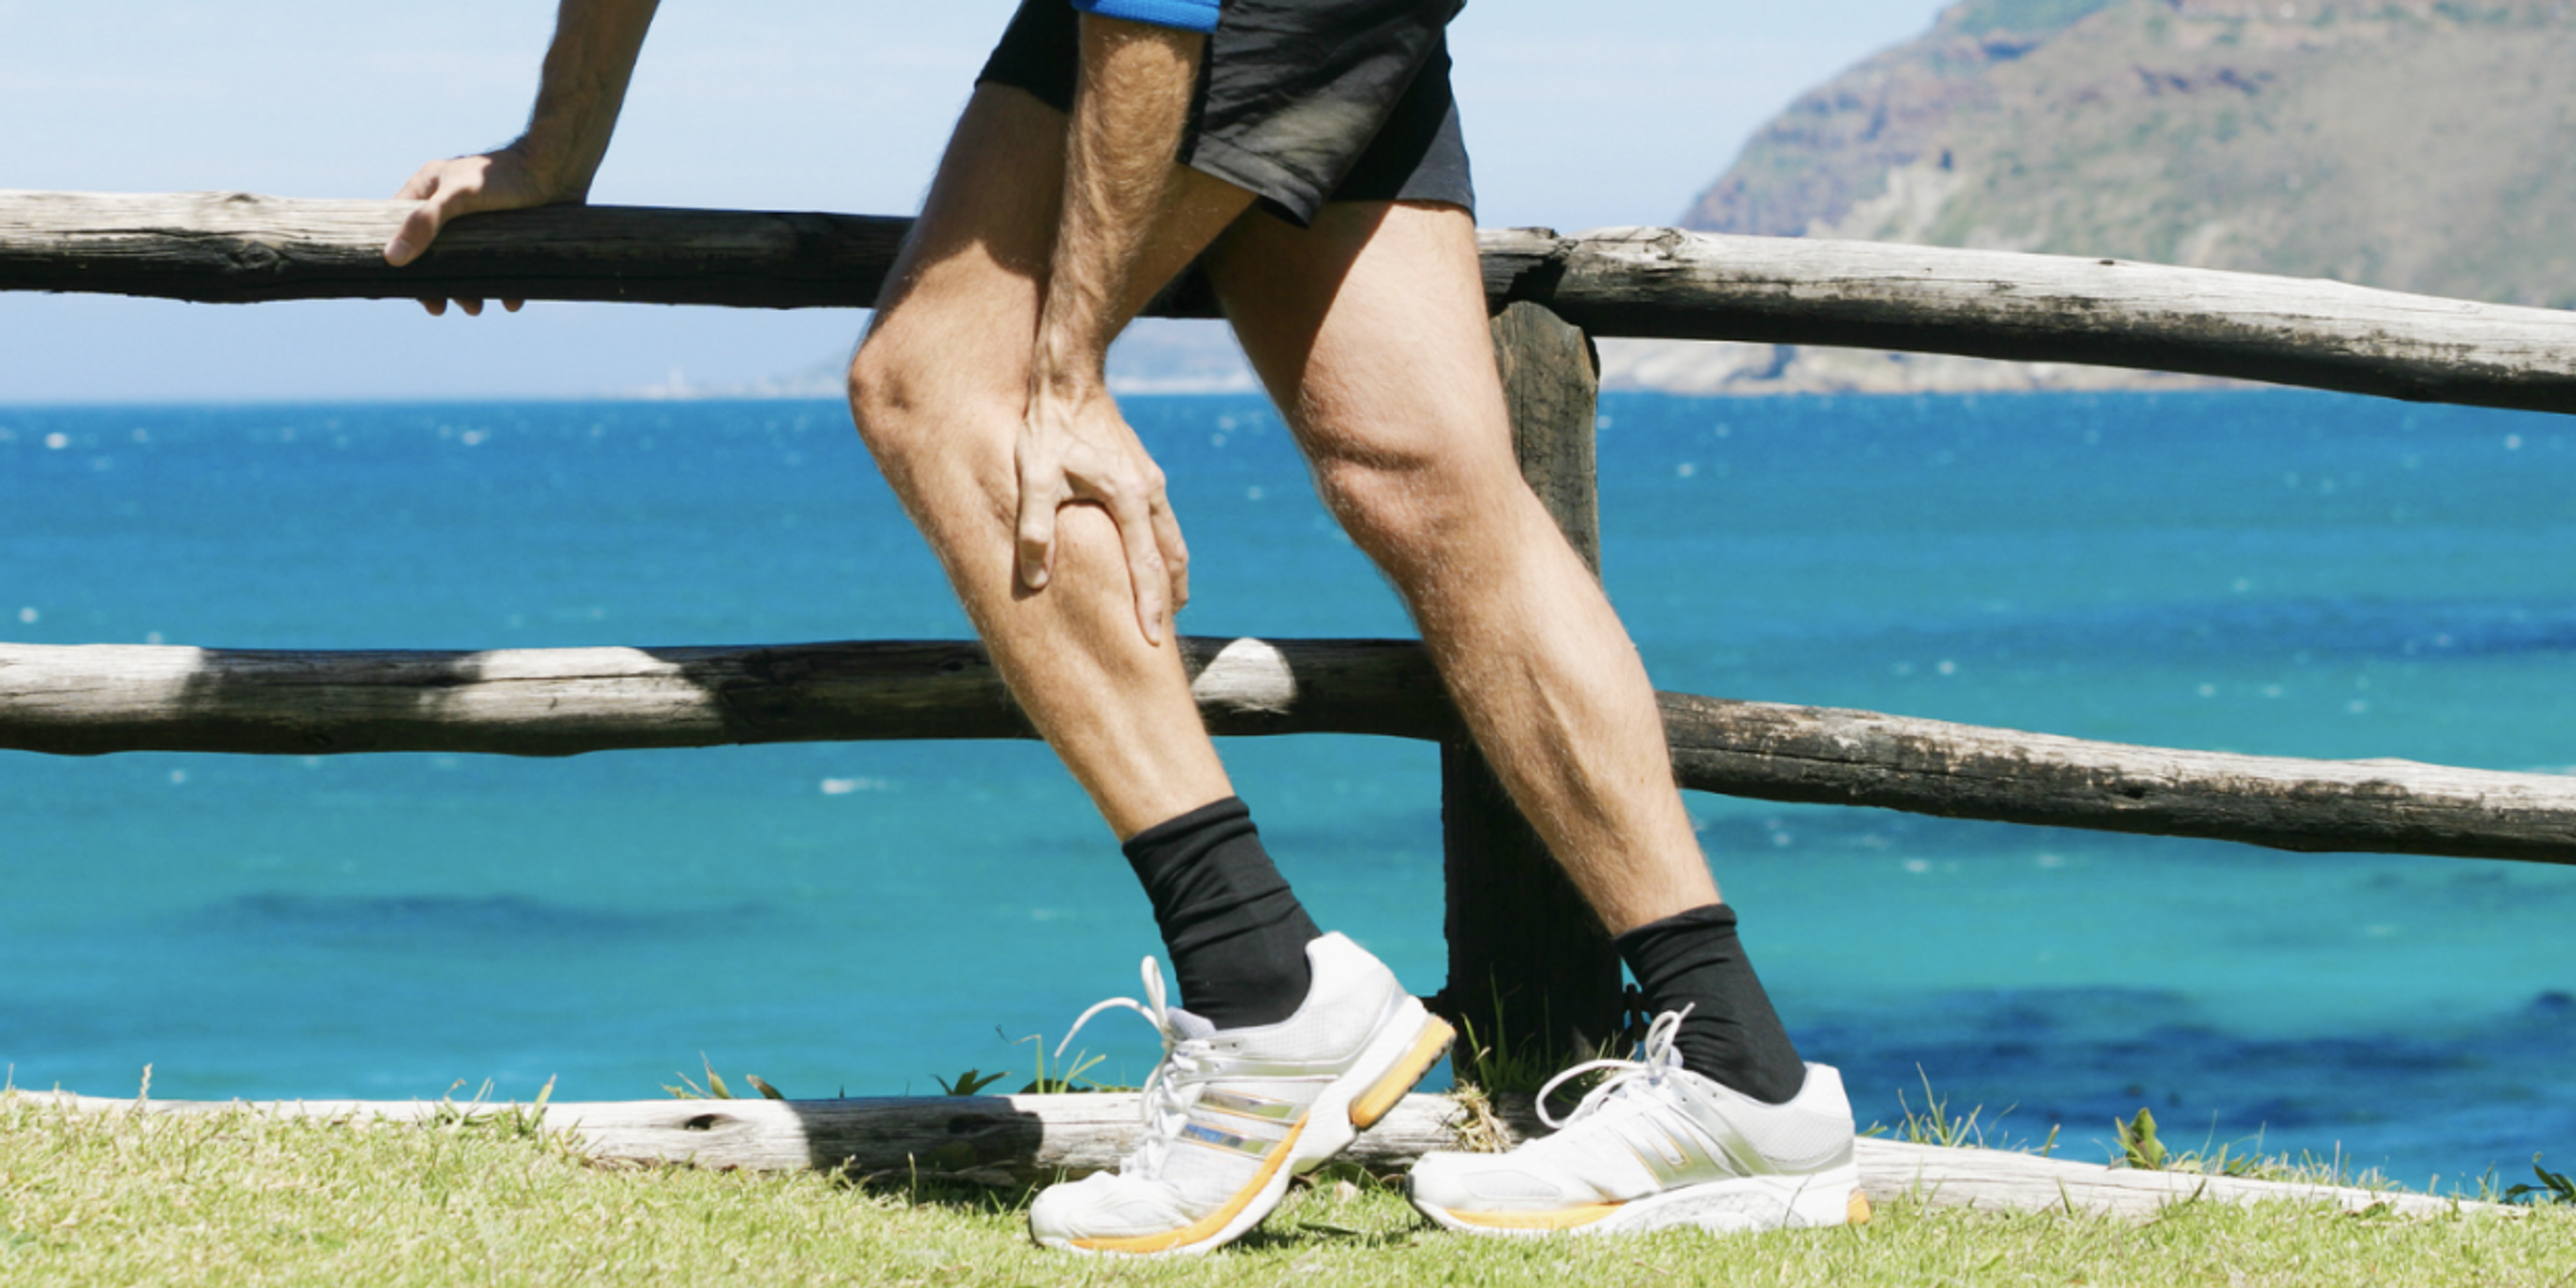 Running on a strained cRunning on a strained calf before it has regained full strength usually leads to re-injury.alf before it has regained full strength usually leads to re-injury.